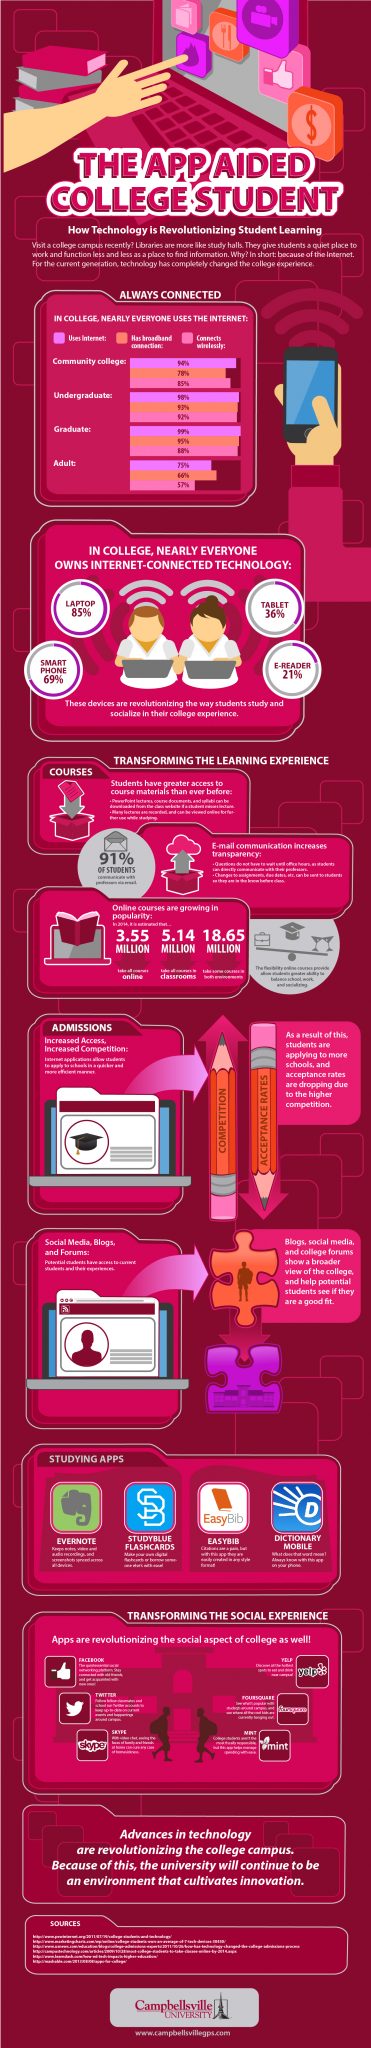 The App-Aided College Student | Campbellsville U Infographic